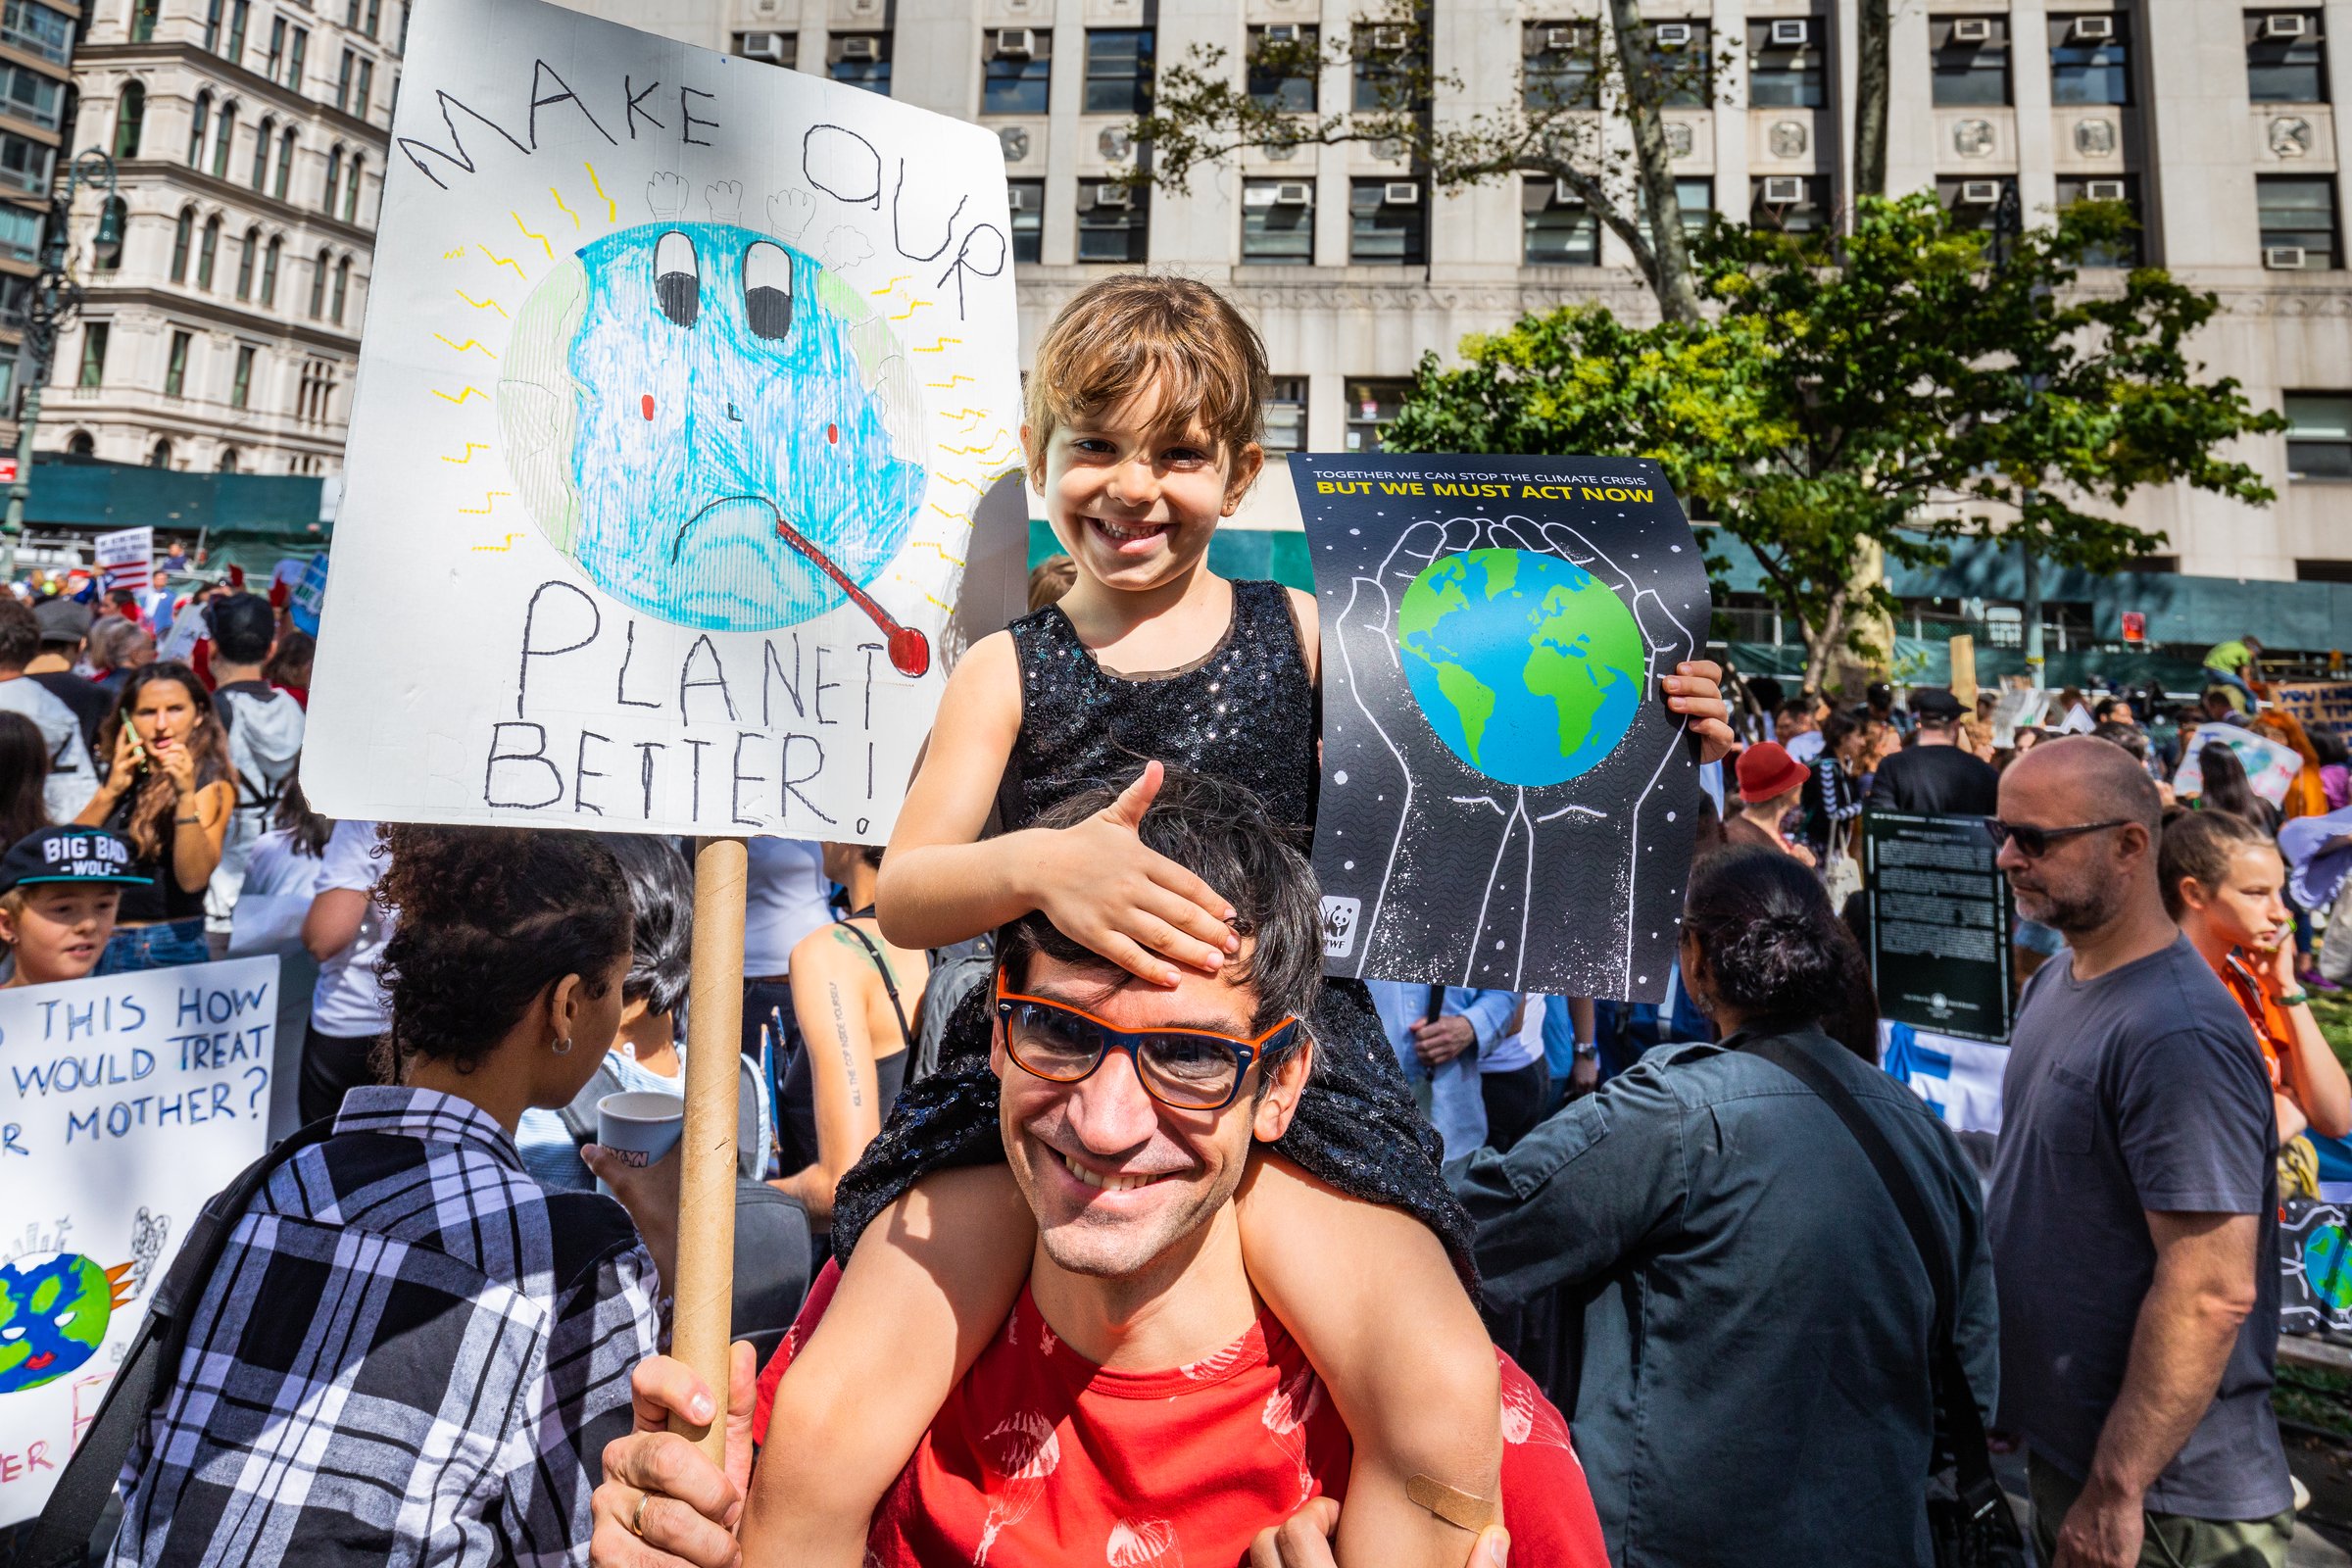 Protesters at the climate march